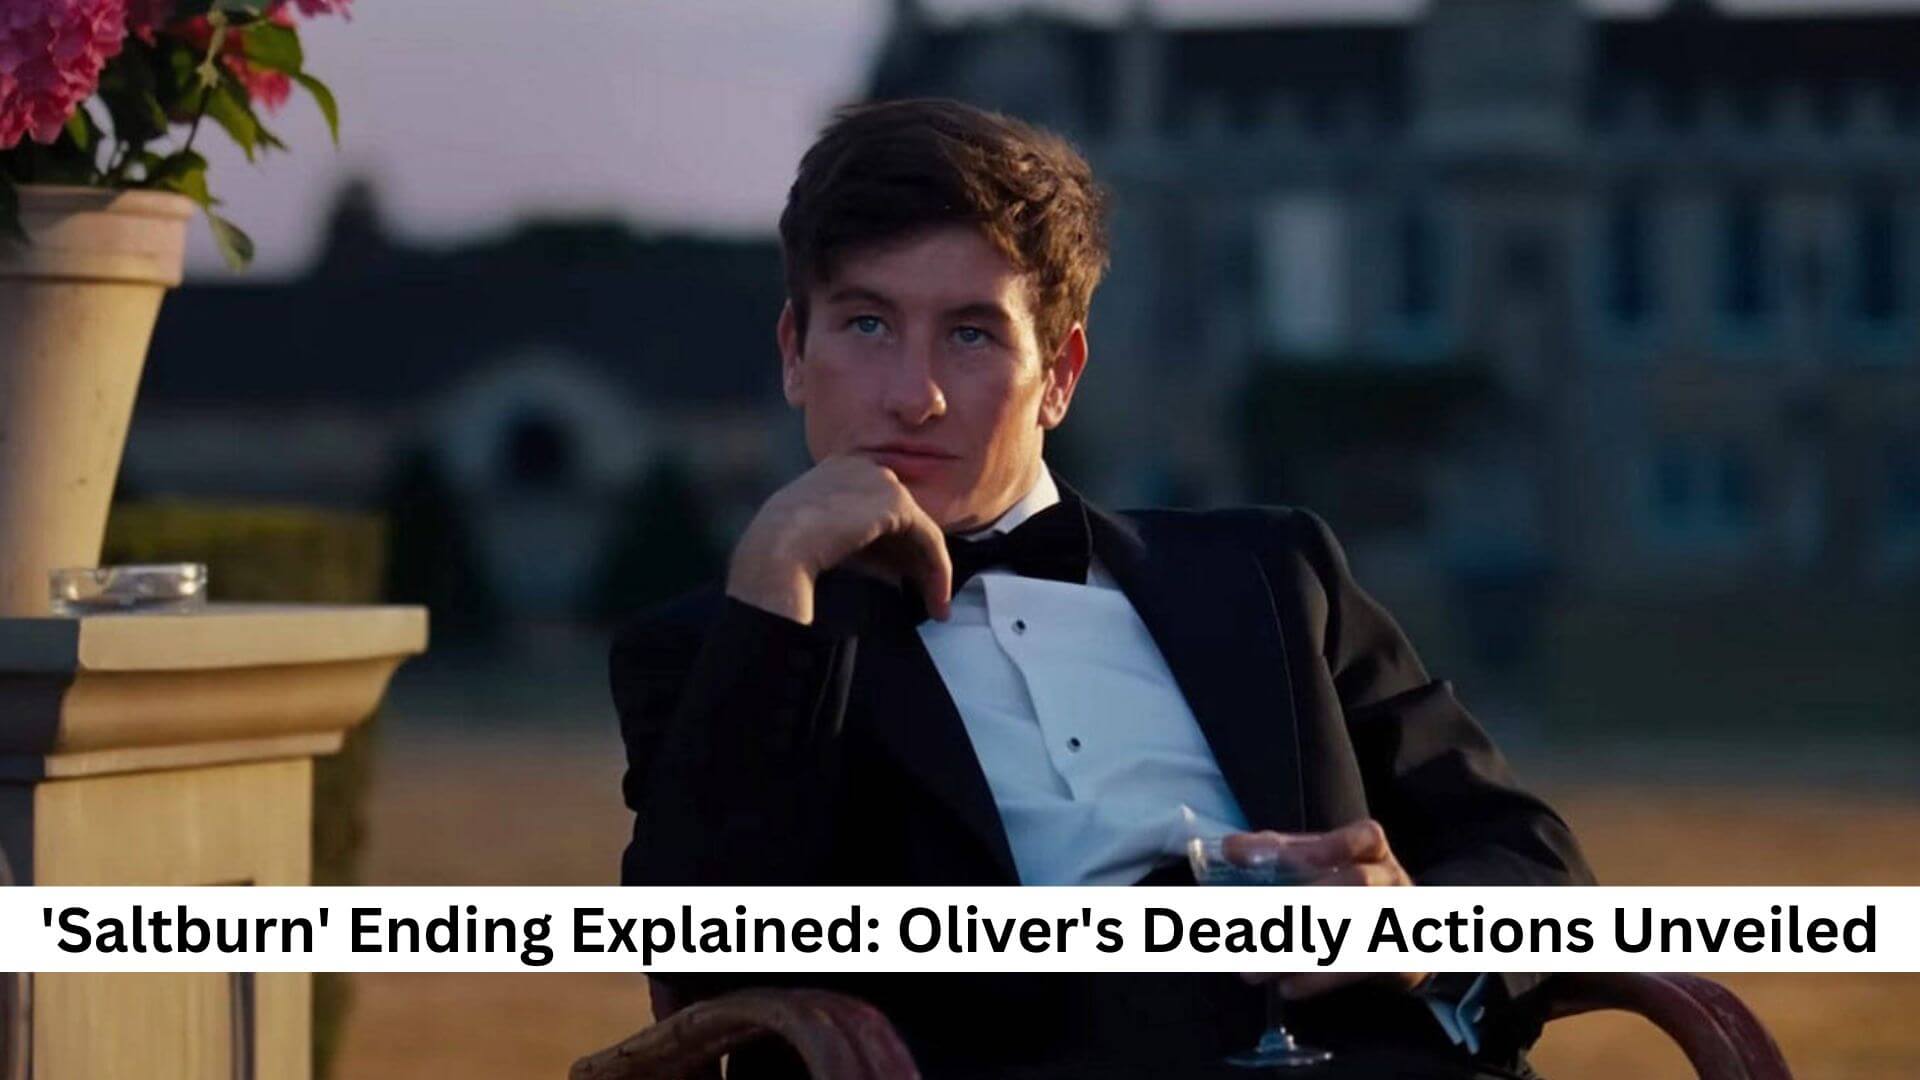 'Saltburn' Ending Explained: Oliver's Deadly Actions Unveiled